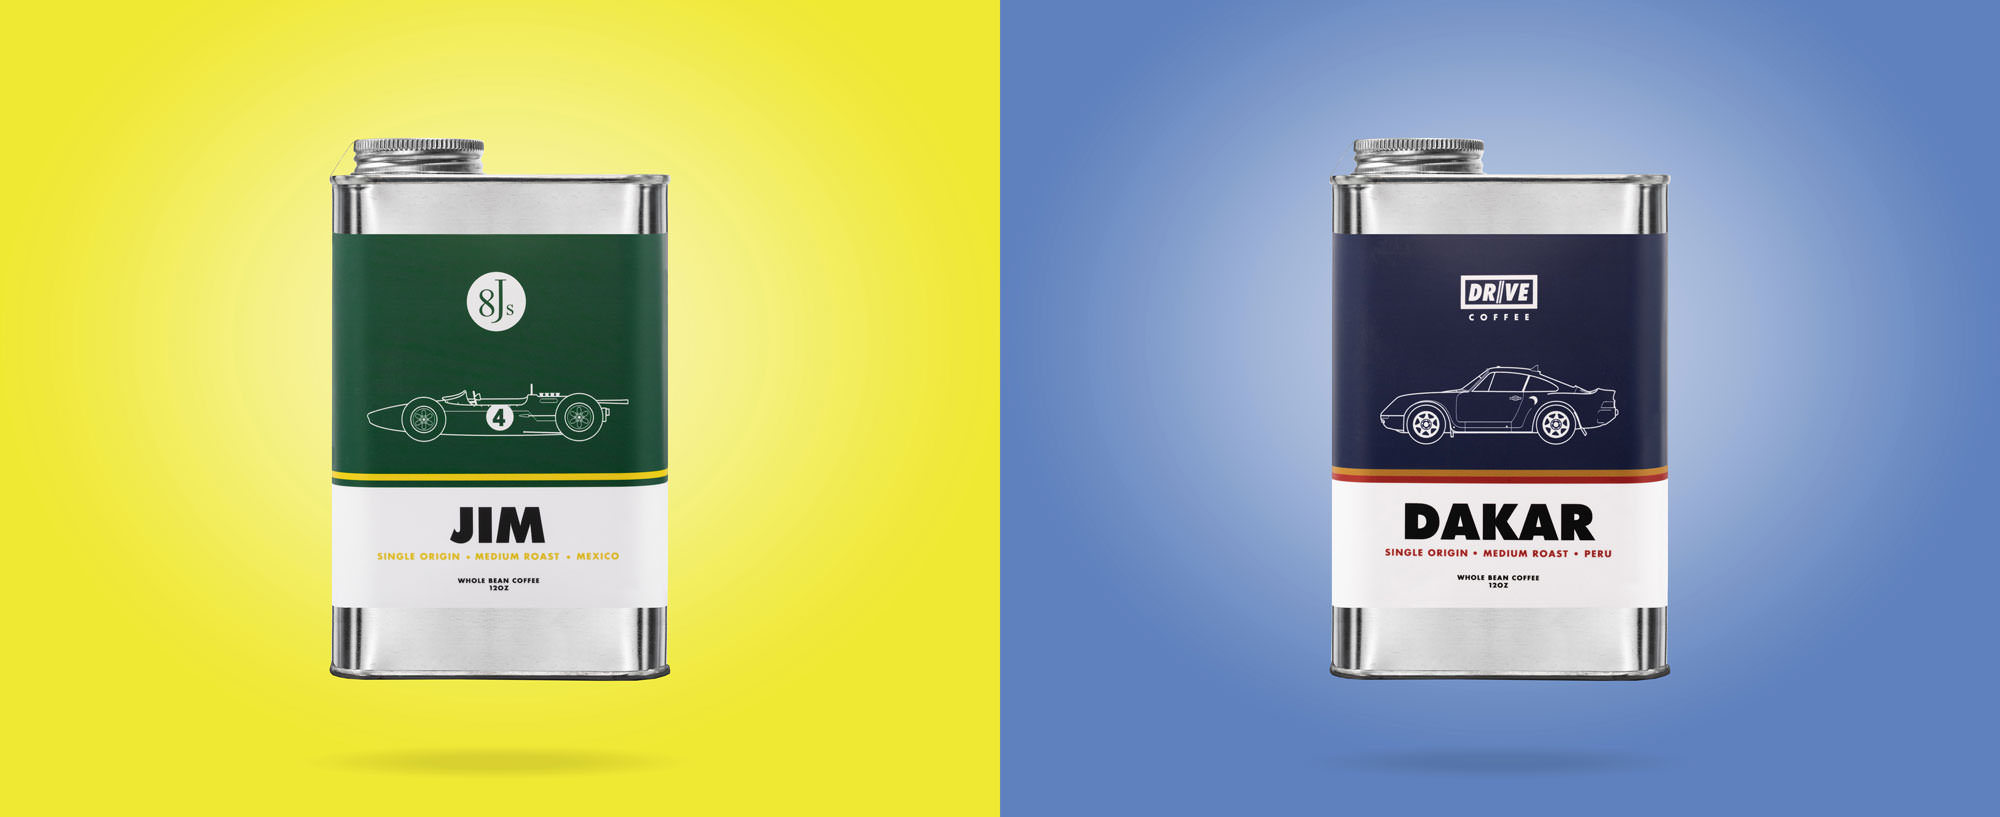 A photograph of 2 floating Drive Coffee Cans — to the left, Jim. To the right, Dakar